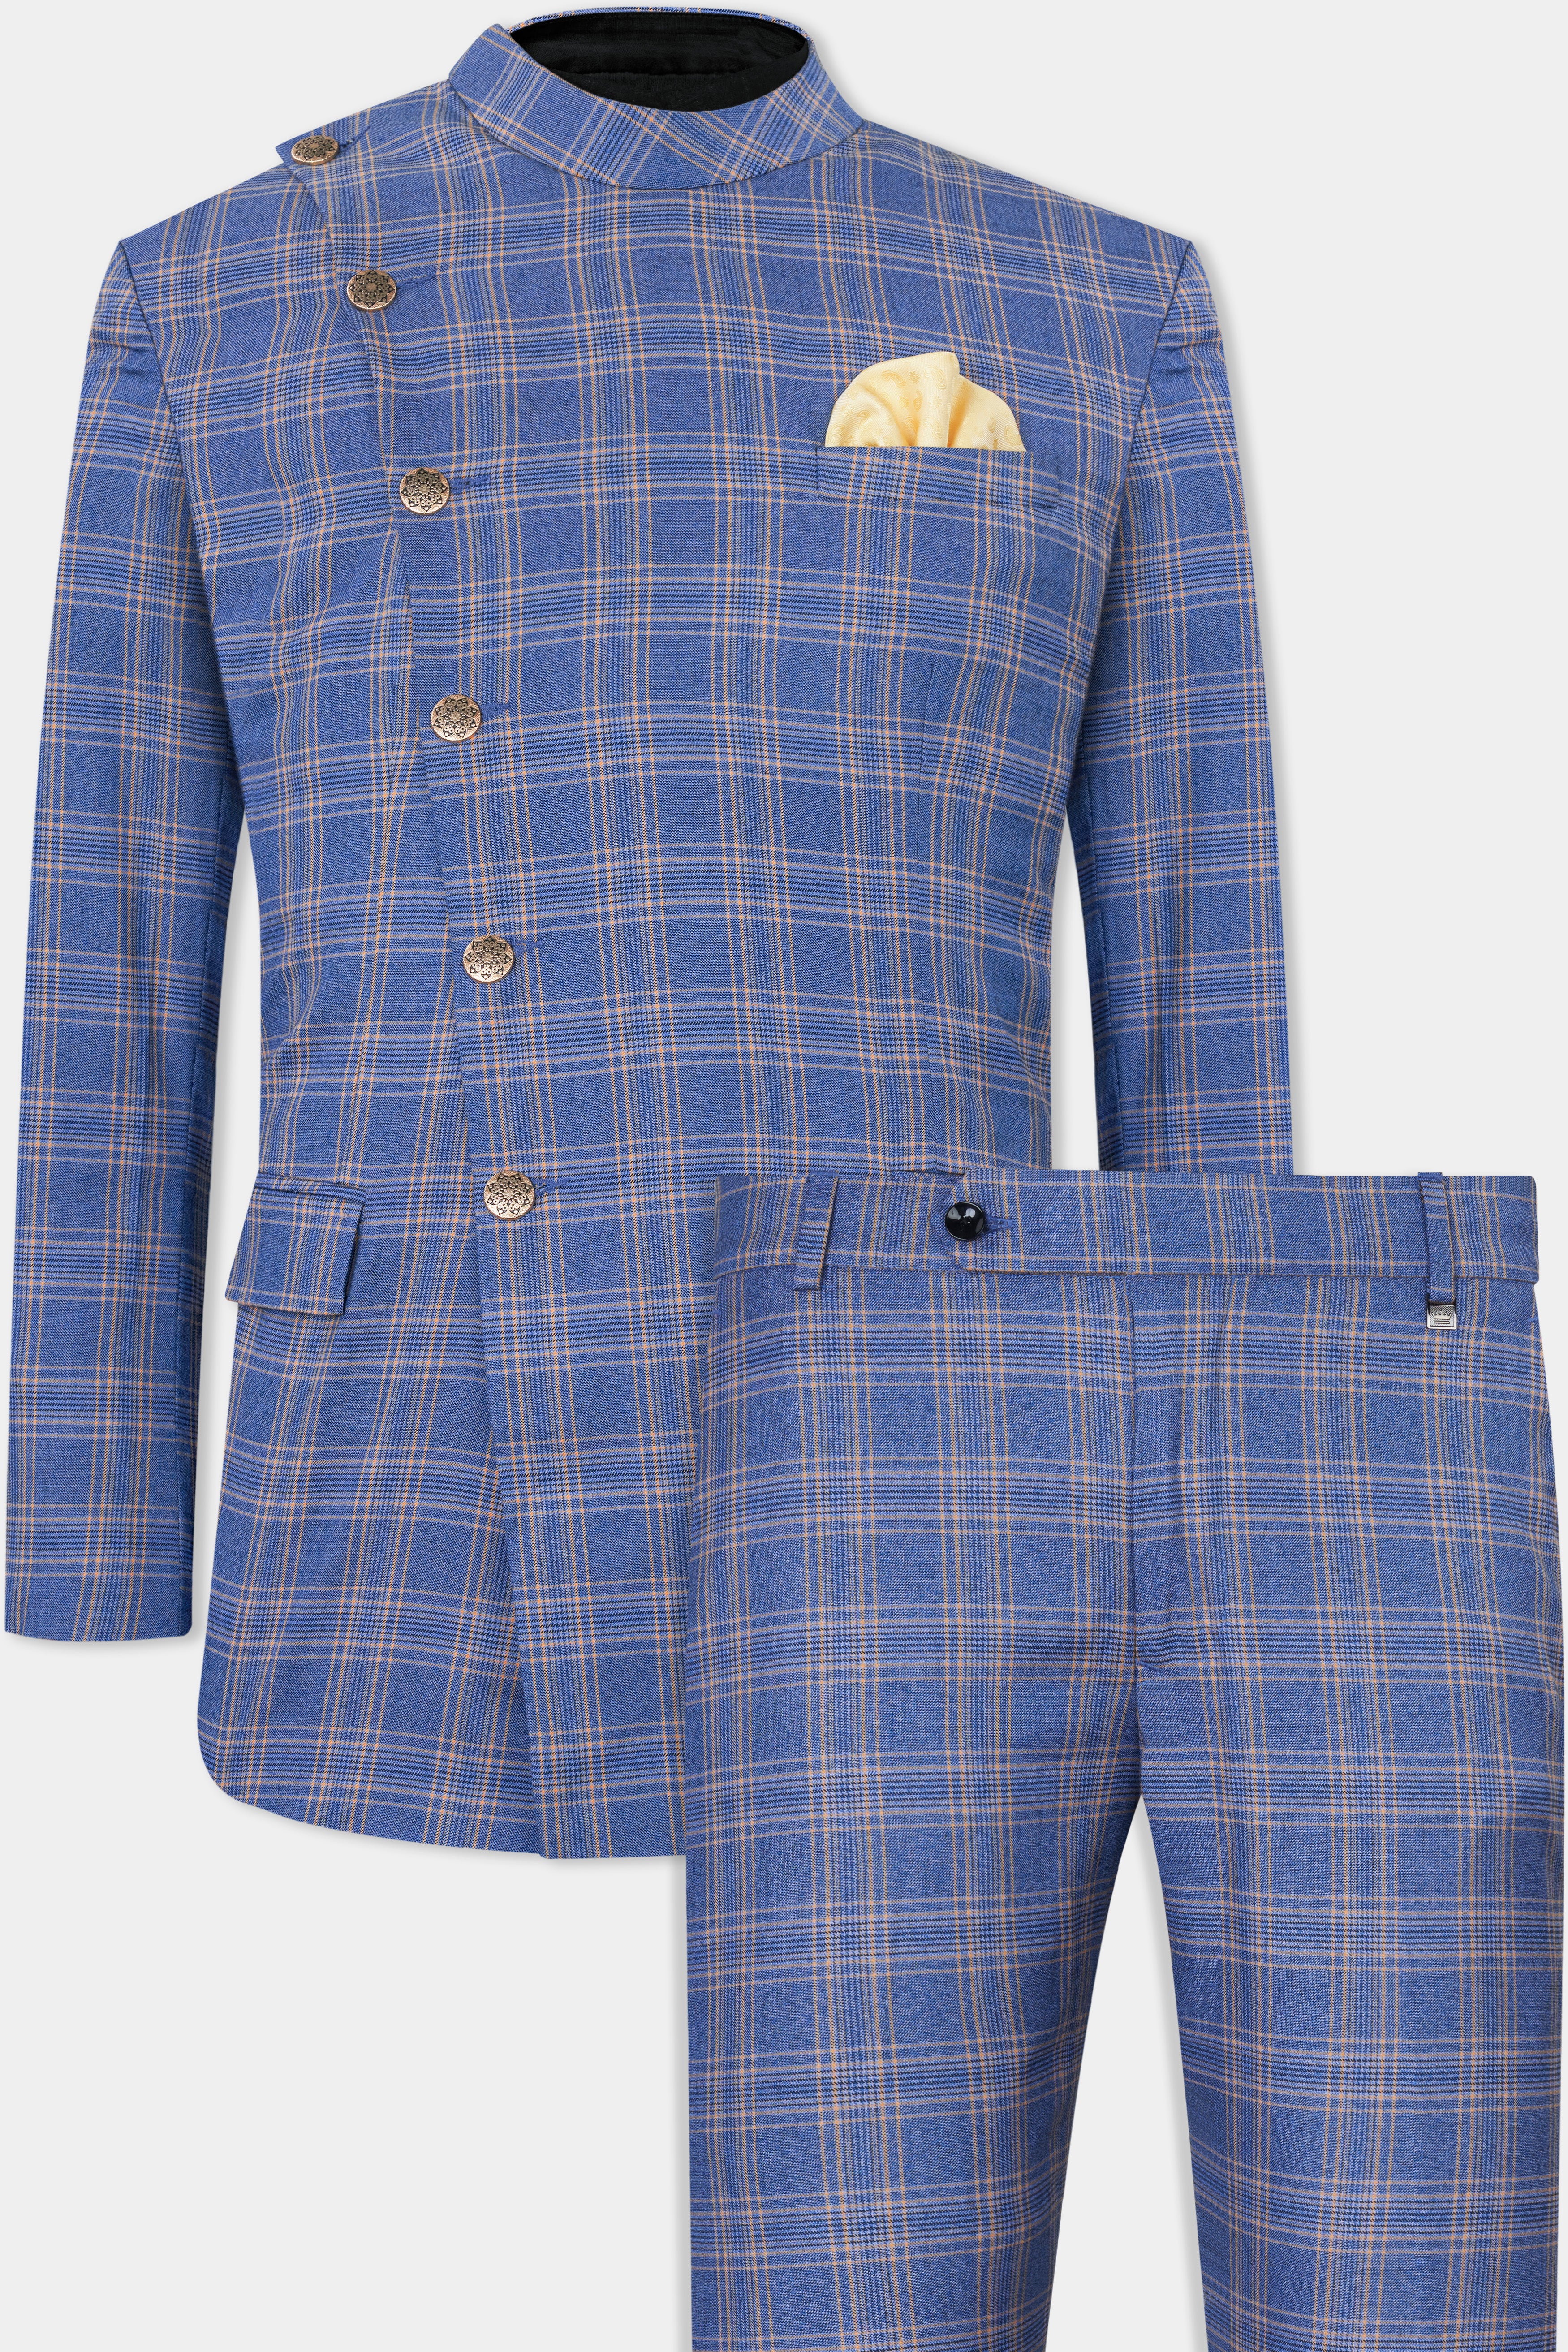 Scampi Blue and Muesli Brown Plaid Wool Rich Cross Buttoned Bandhgala Suit ST2771-CBG2-36, ST2771-CBG2-38, ST2771-CBG2-40, ST2771-CBG2-42, ST2771-CBG2-44, ST2771-CBG2-46, ST2771-CBG2-48, ST2771-CBG2-50, ST2771-CBG2-52, ST2771-CBG2-54, ST2771-CBG2-56, ST2771-CBG2-58, ST2771-CBG2-60